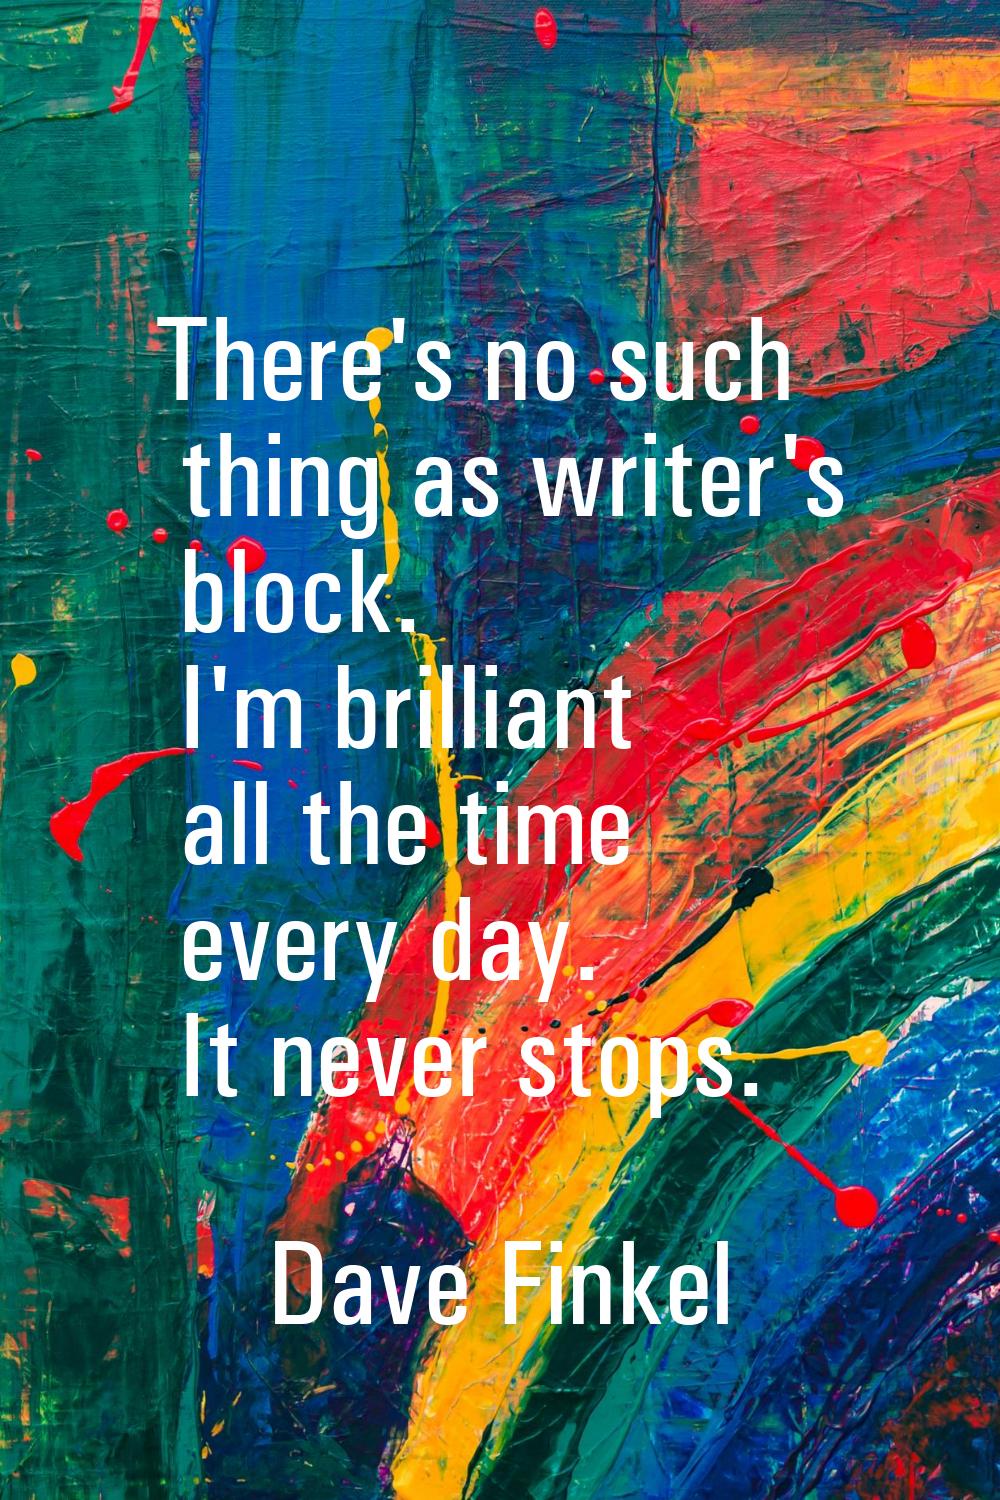 There's no such thing as writer's block. I'm brilliant all the time every day. It never stops.